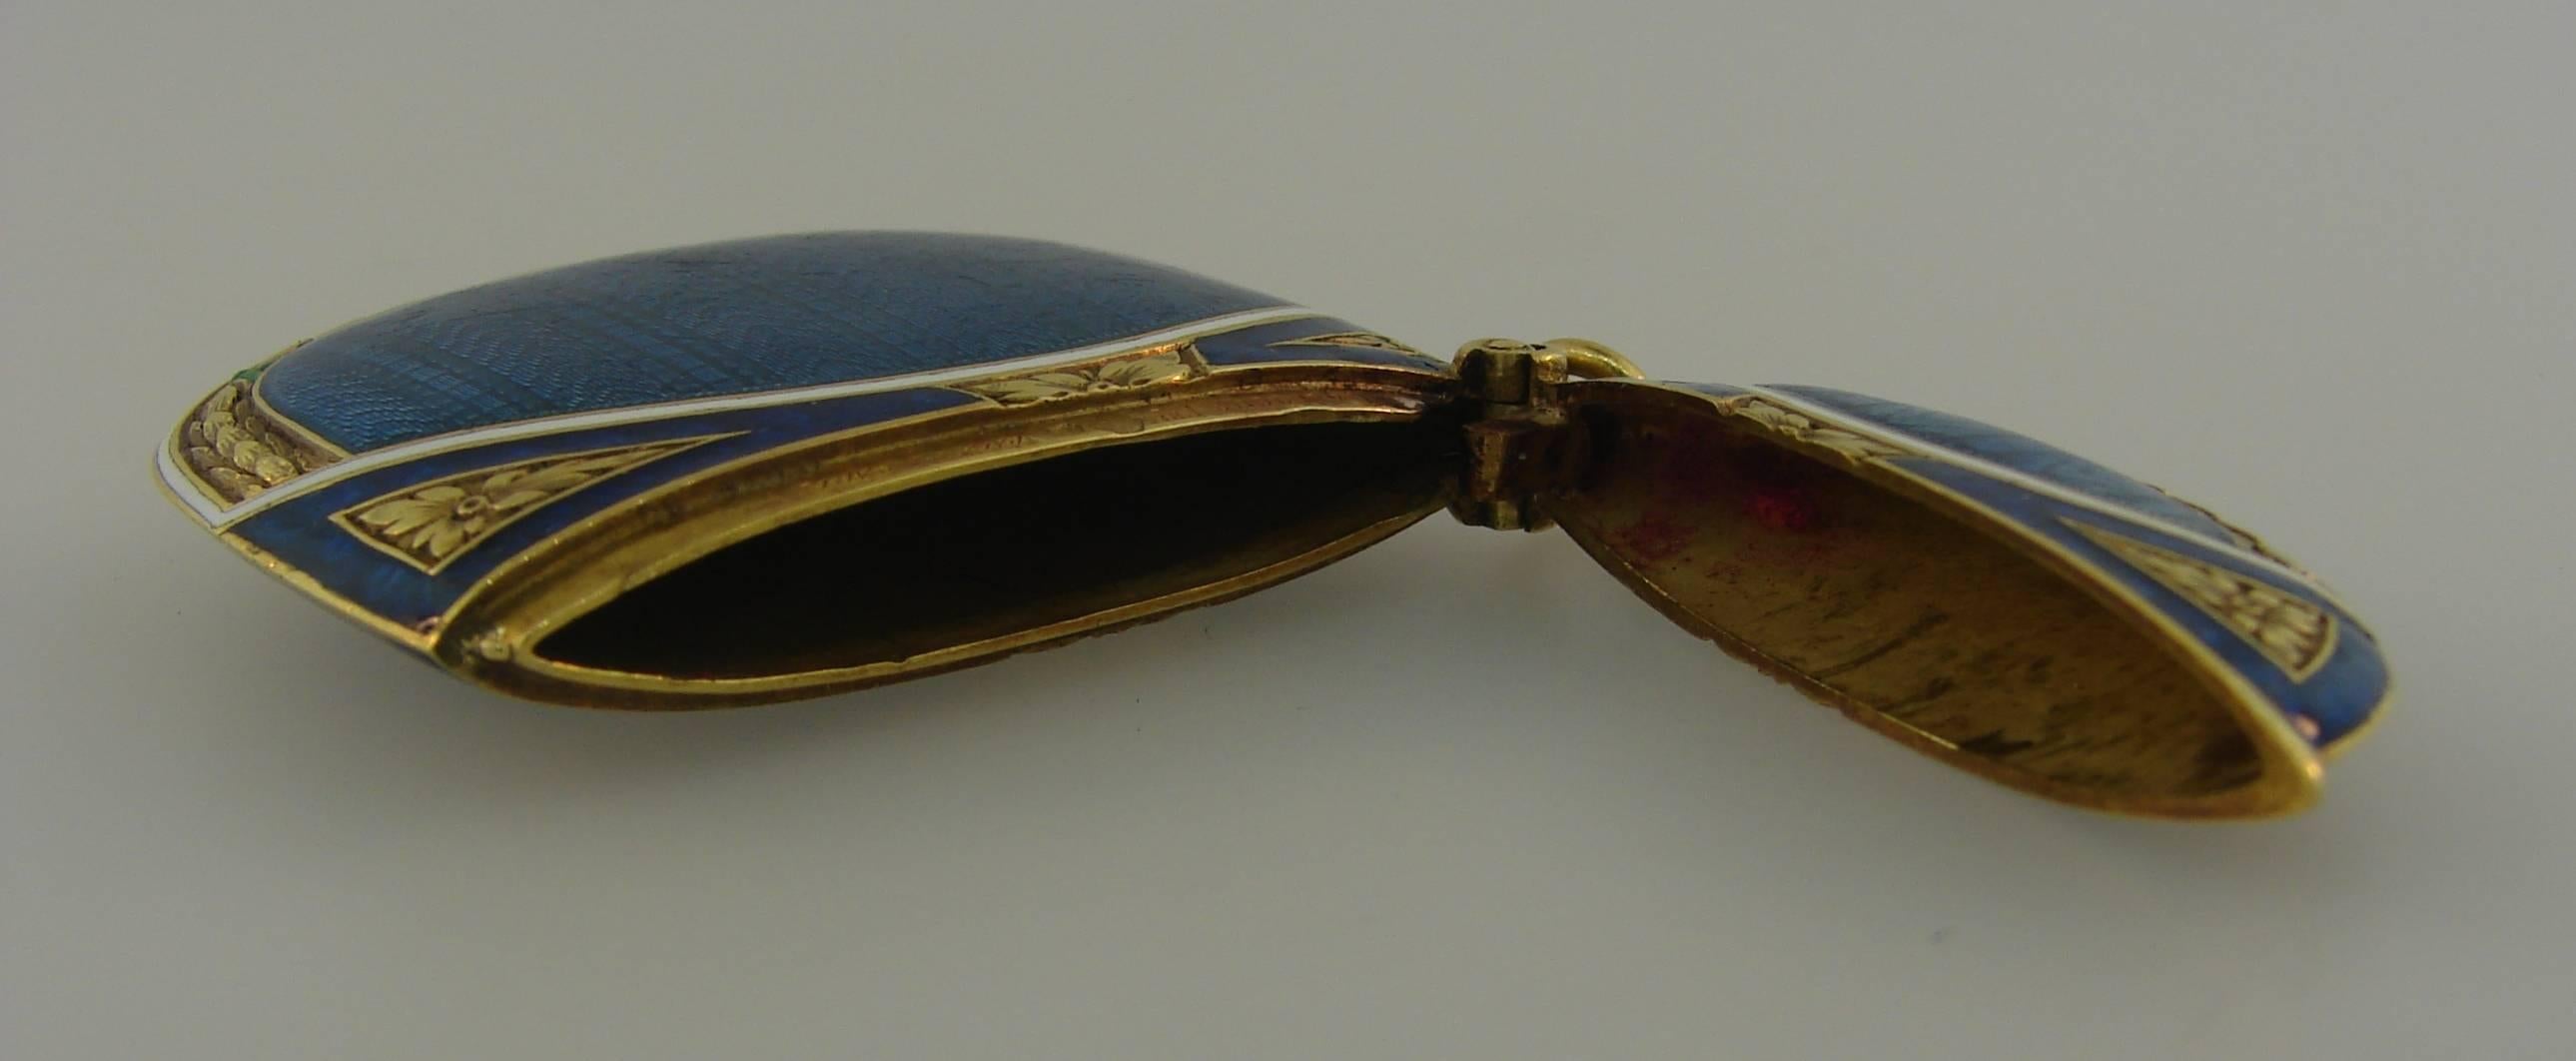 Lacloche Freres Enamel Yellow Gold Pedant with Secret Compartment 1